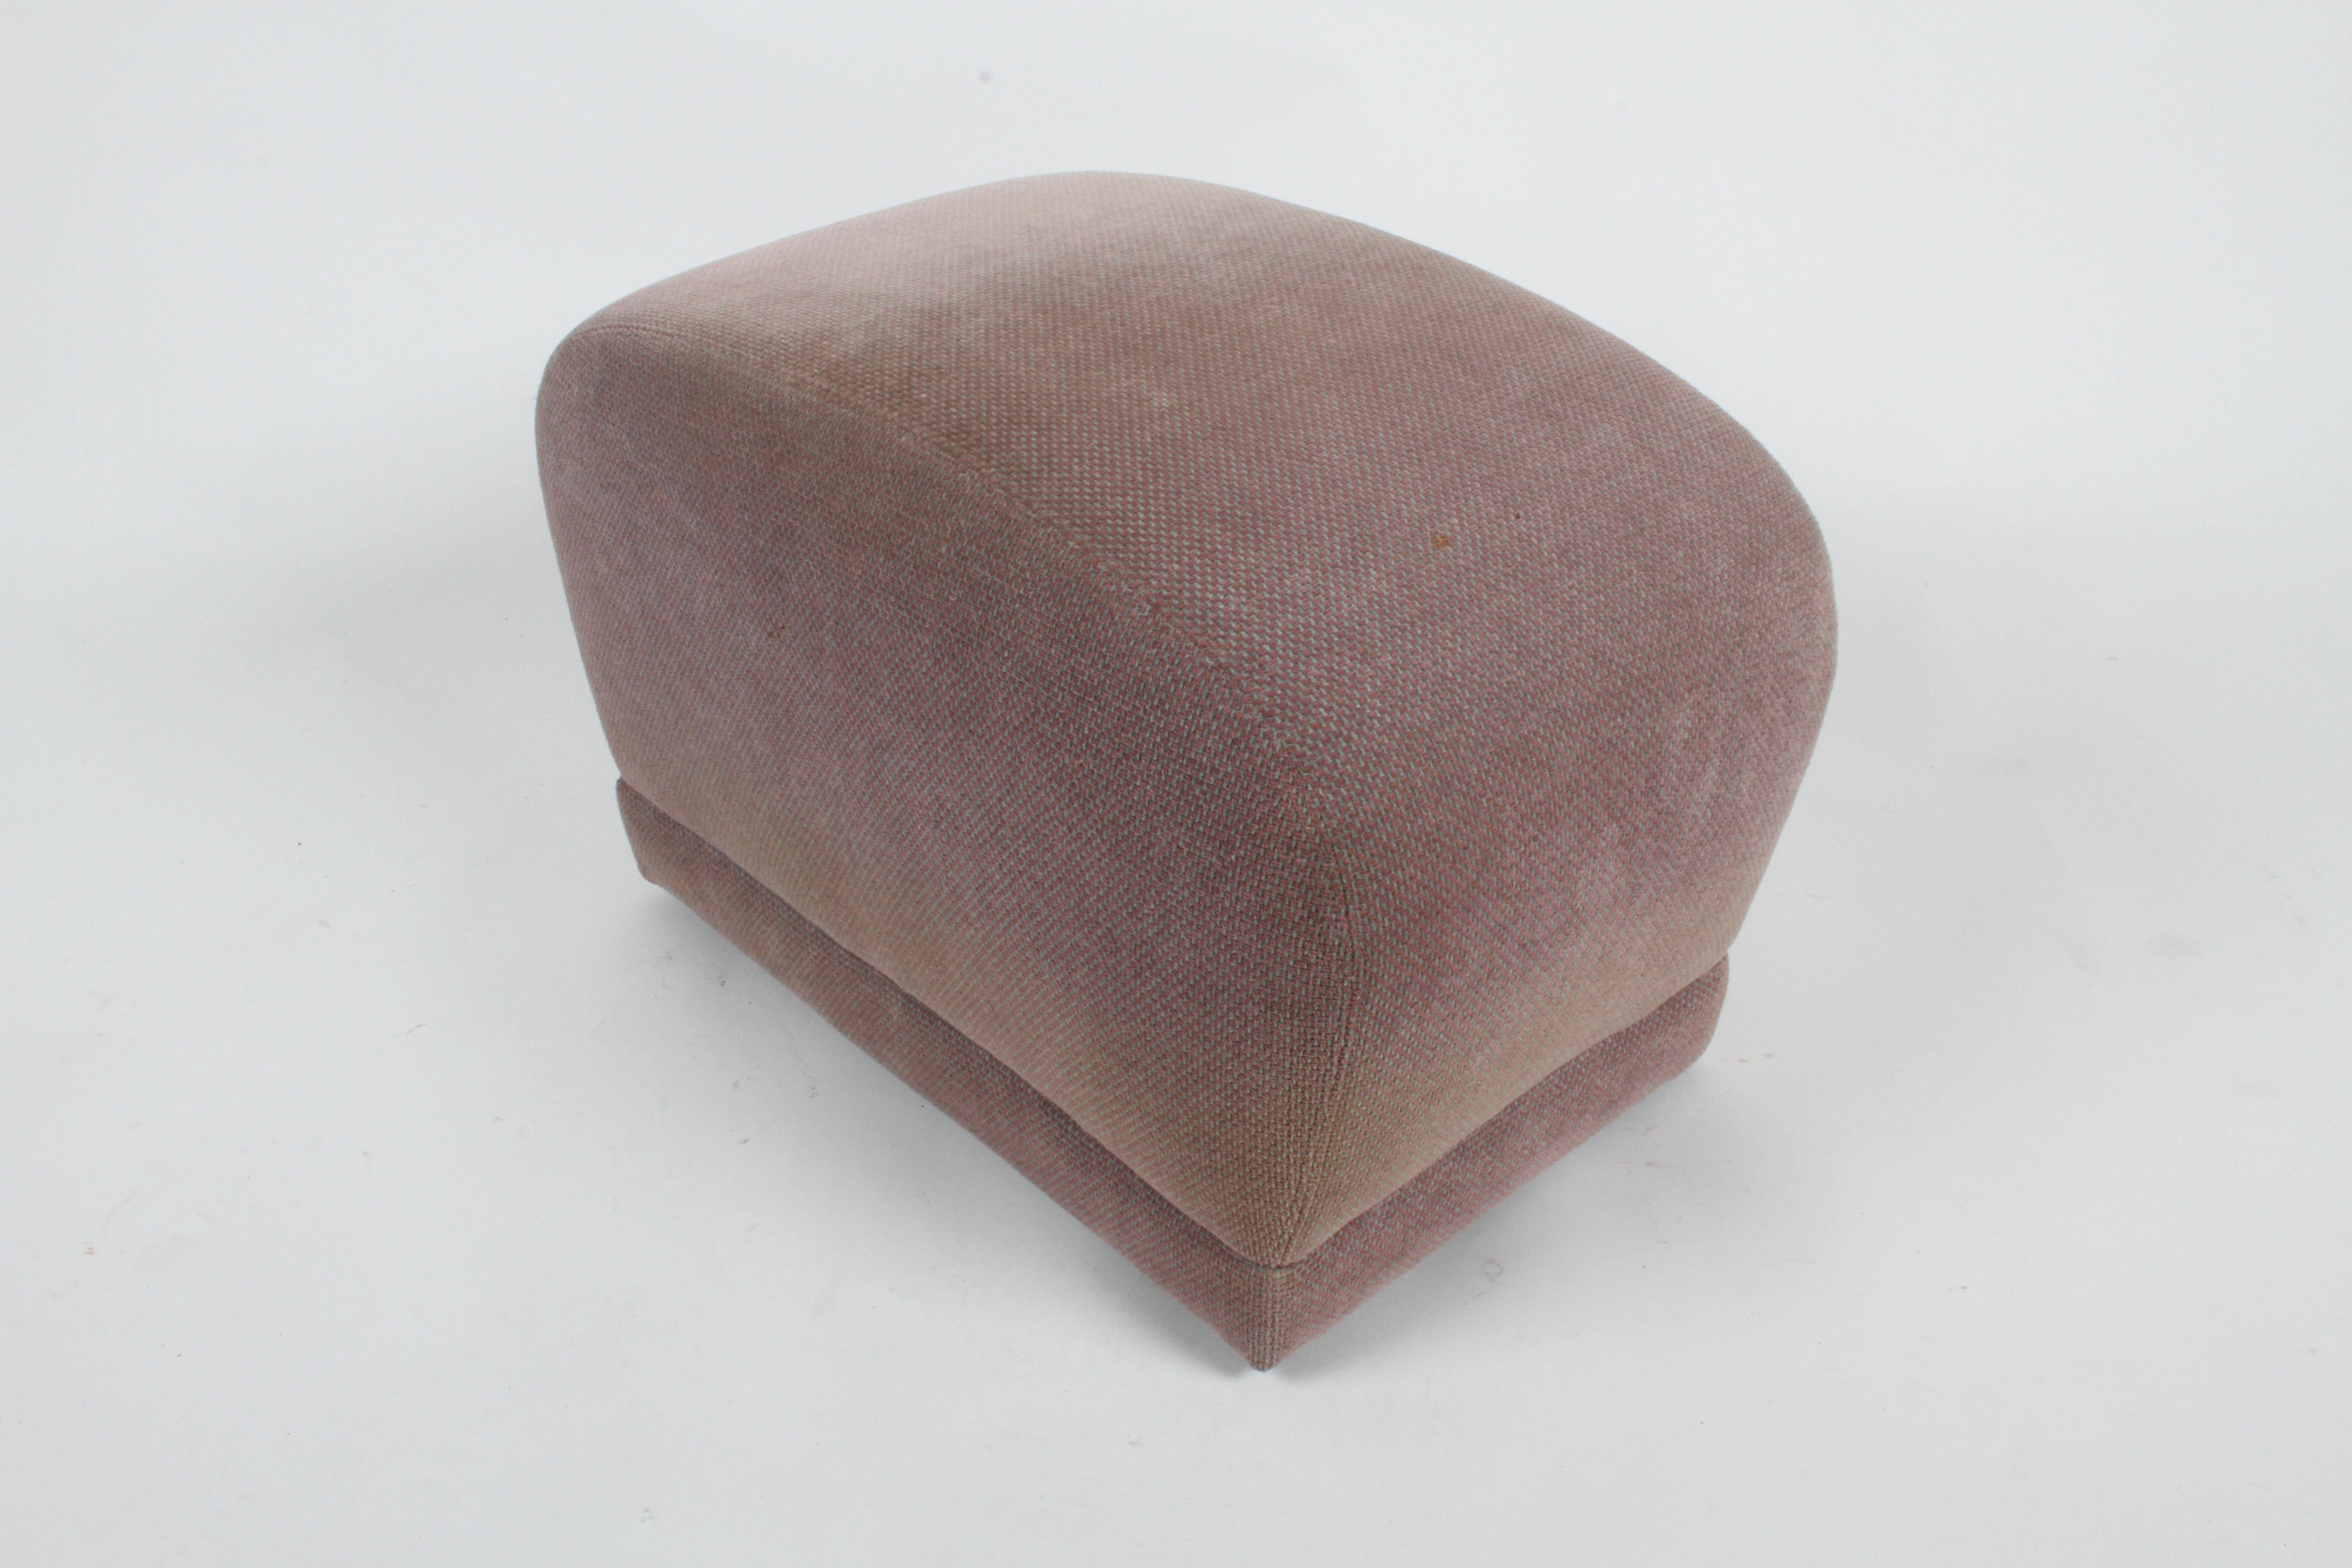 Pair of 1980's Upholstered Poufs or Ottomans on Castors, Style of Milo Baughman 1